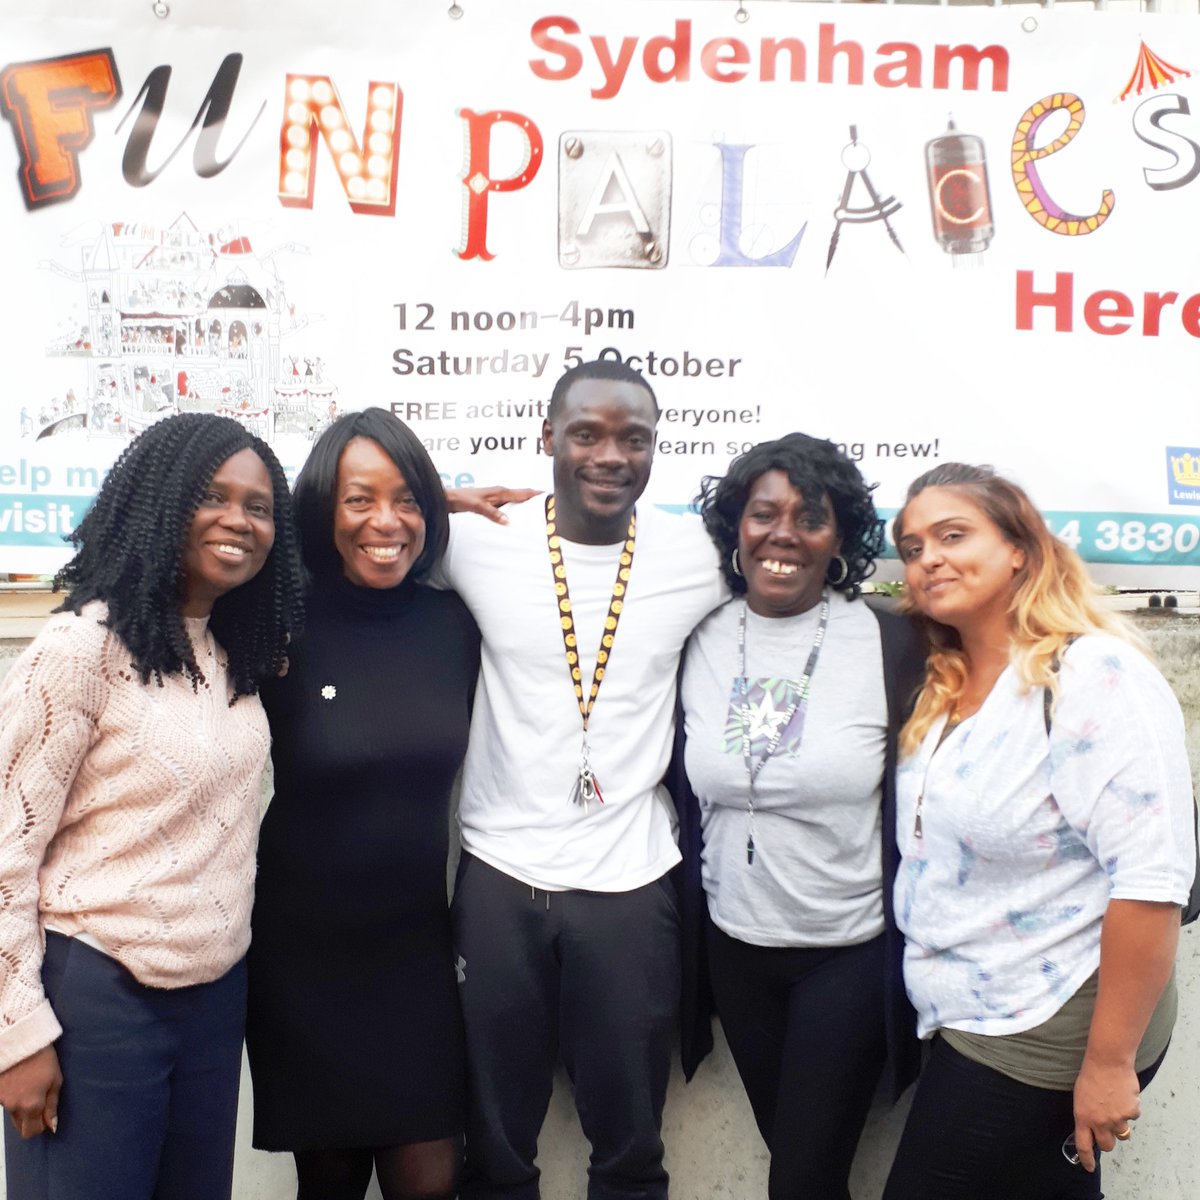 @funpalaces @sydfunpalace Banner is up! So is the energy @youthfirstldn quick picture #jrhyshealing121 #parents #entrepreneurs #localbusinesses #communitychangers #togther #networking #encouragingpositivesocialvaluesinyouthsandcommunities #educators  @sabrinapdixon #teampower